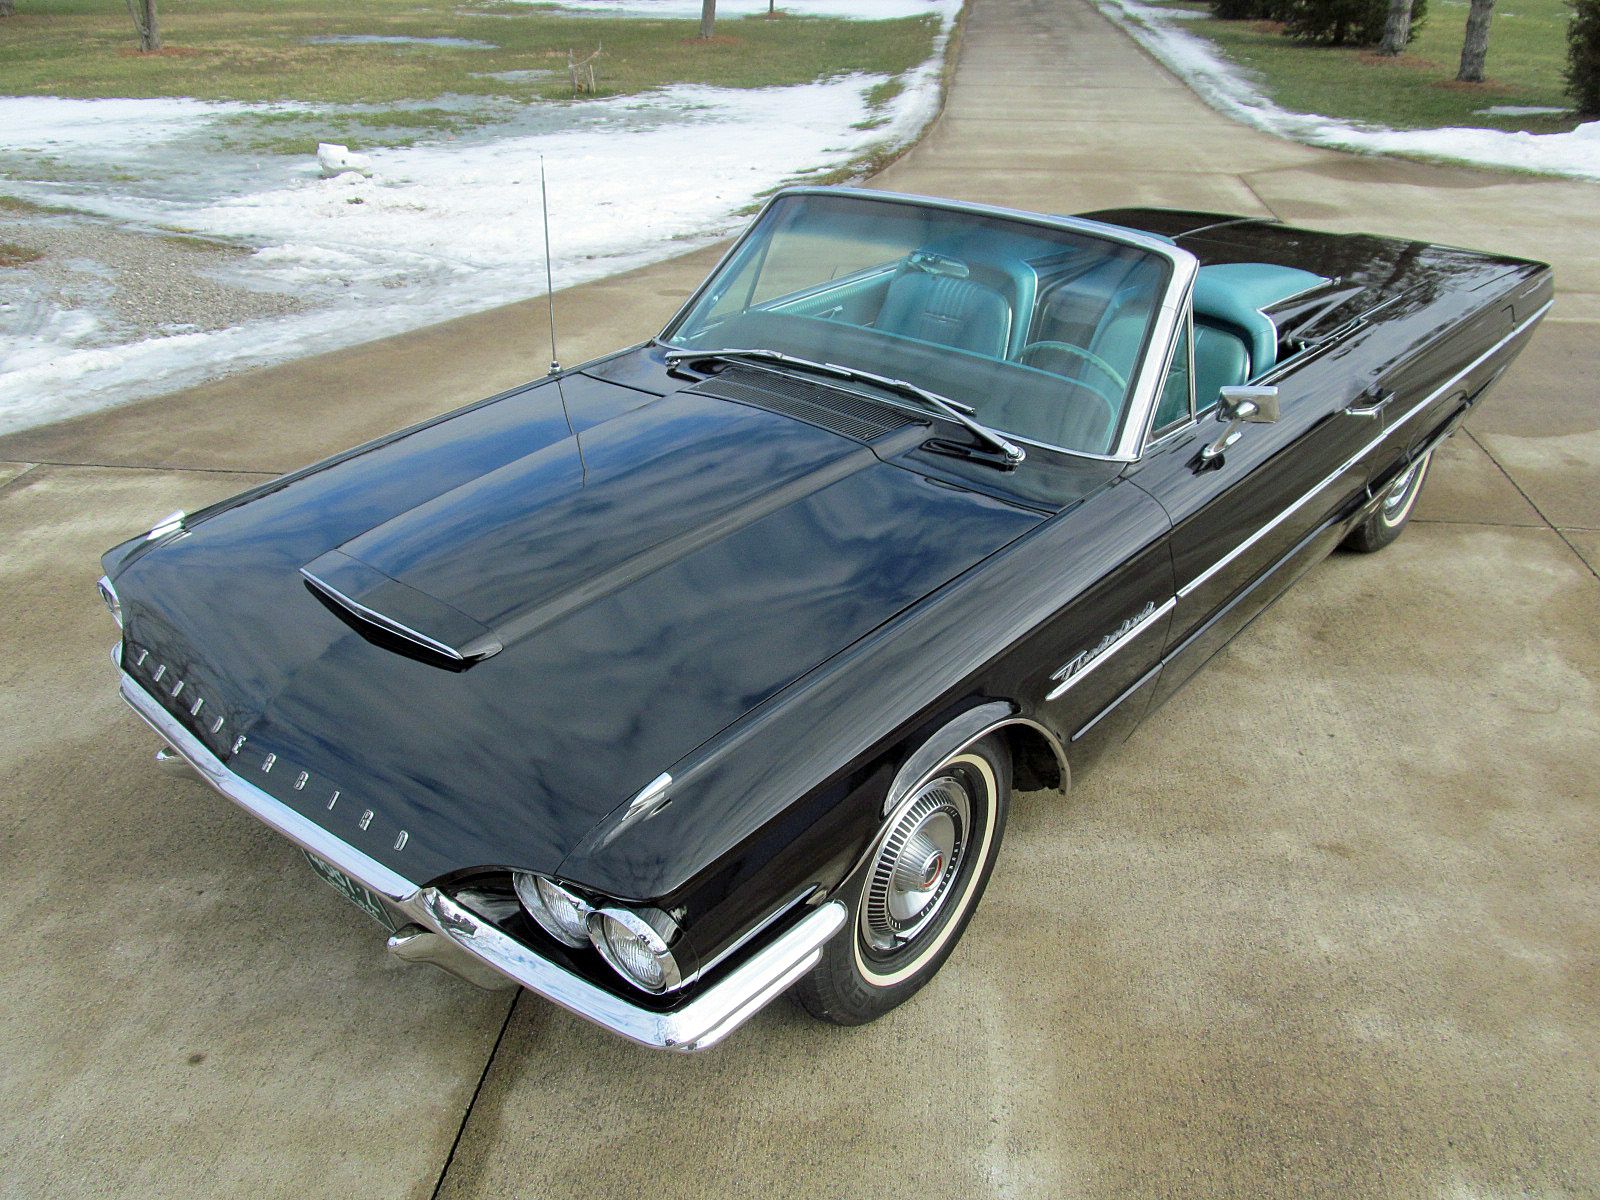  Ford Thunderbird Convertible With Roadster Kit And